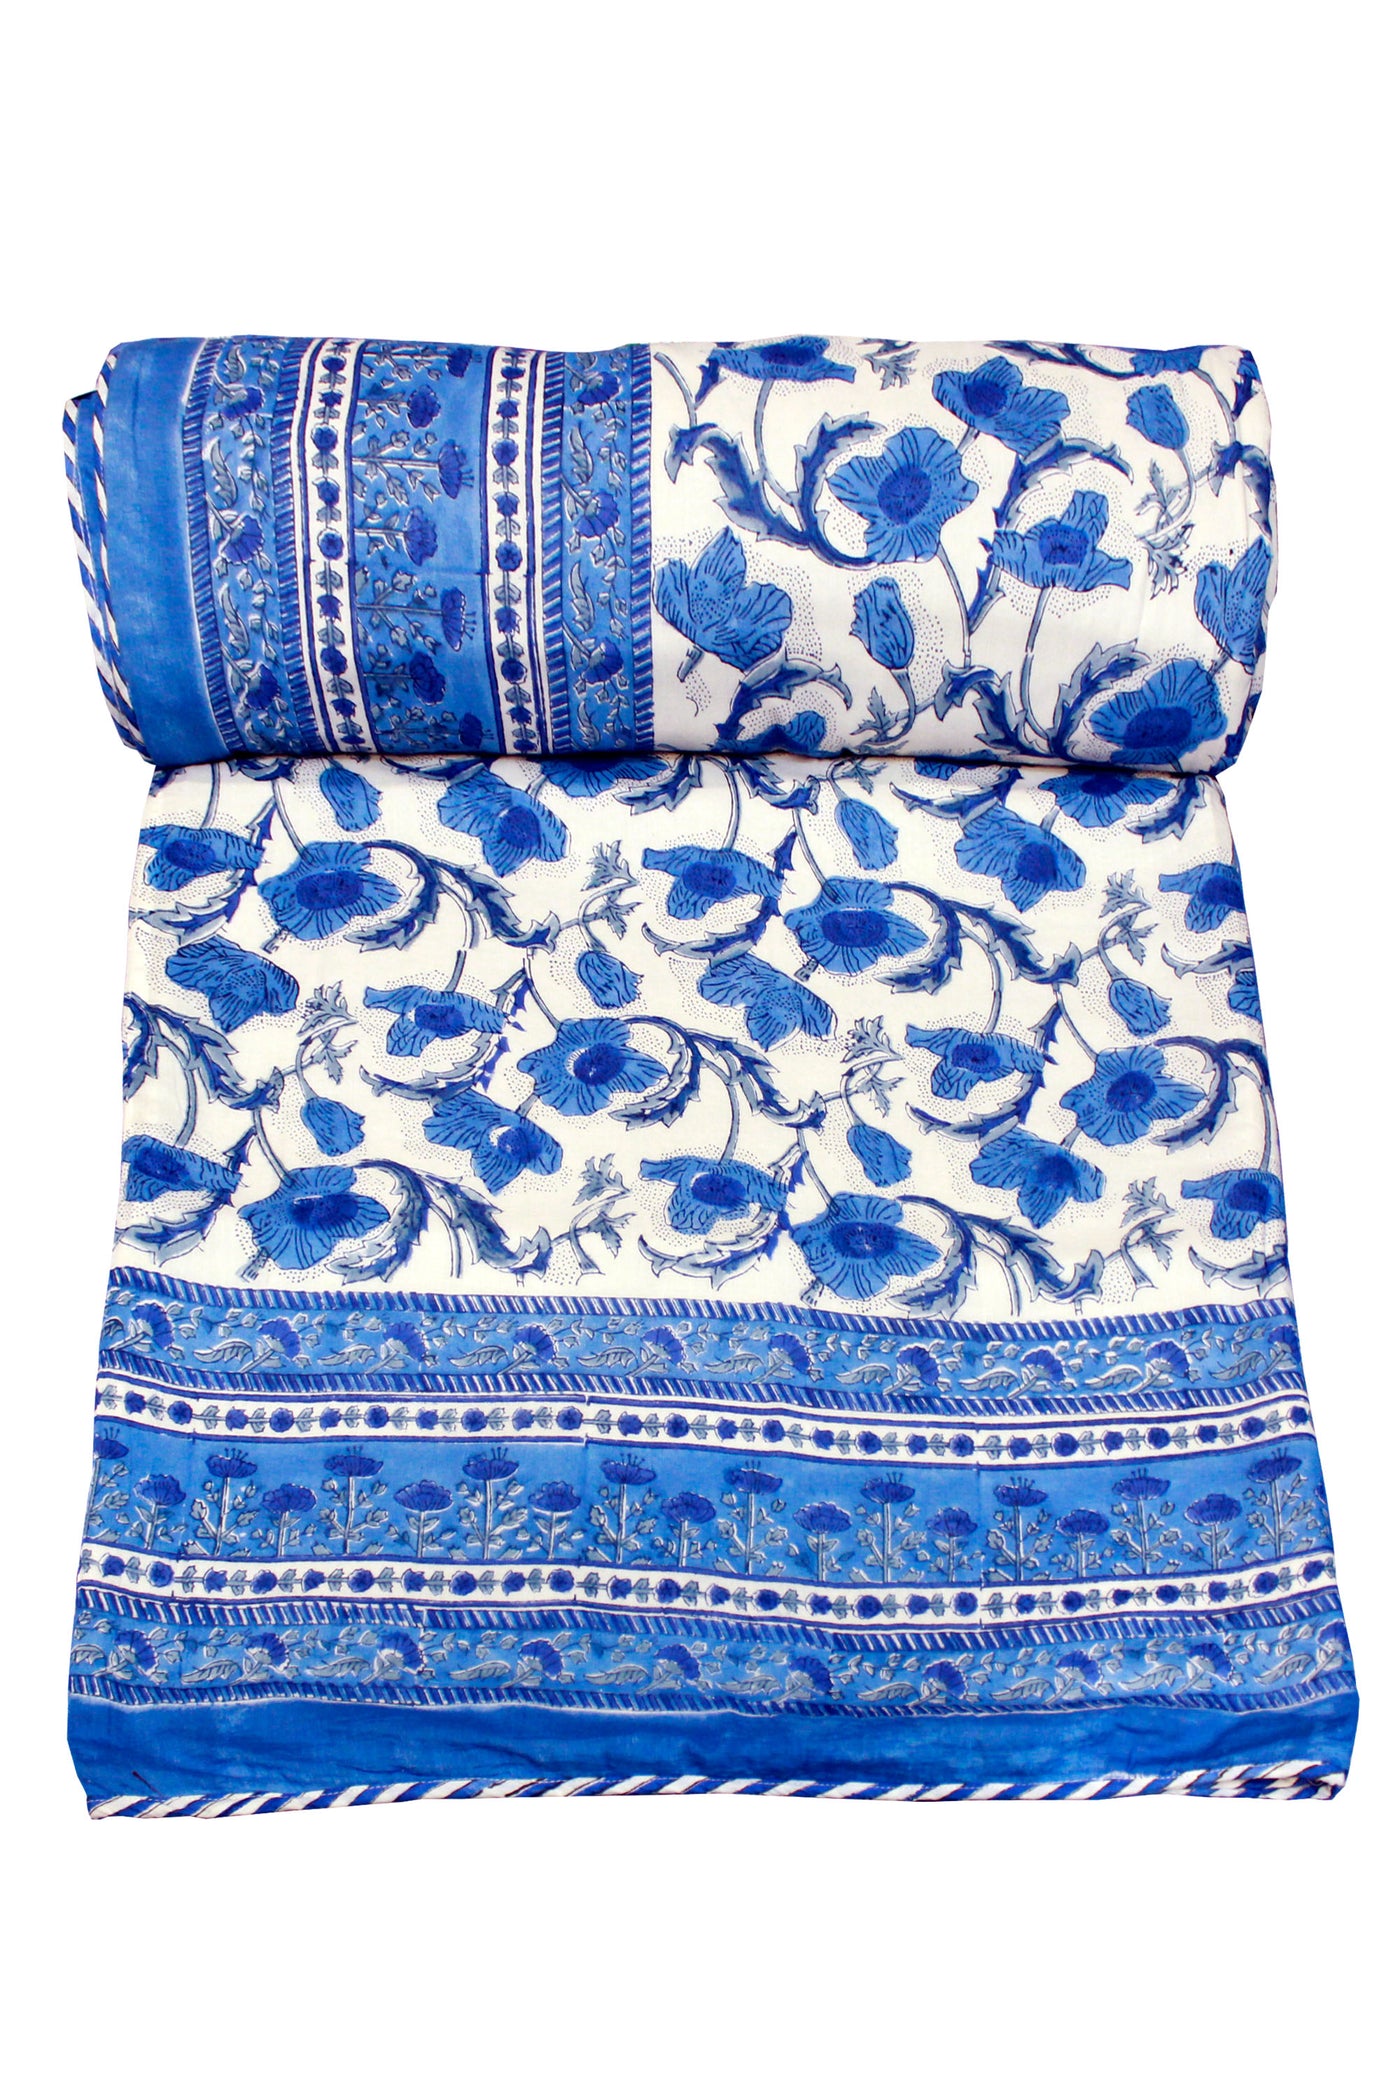 Cotton Floral Jaal Hand Block Print Dohar in Midnight Blue